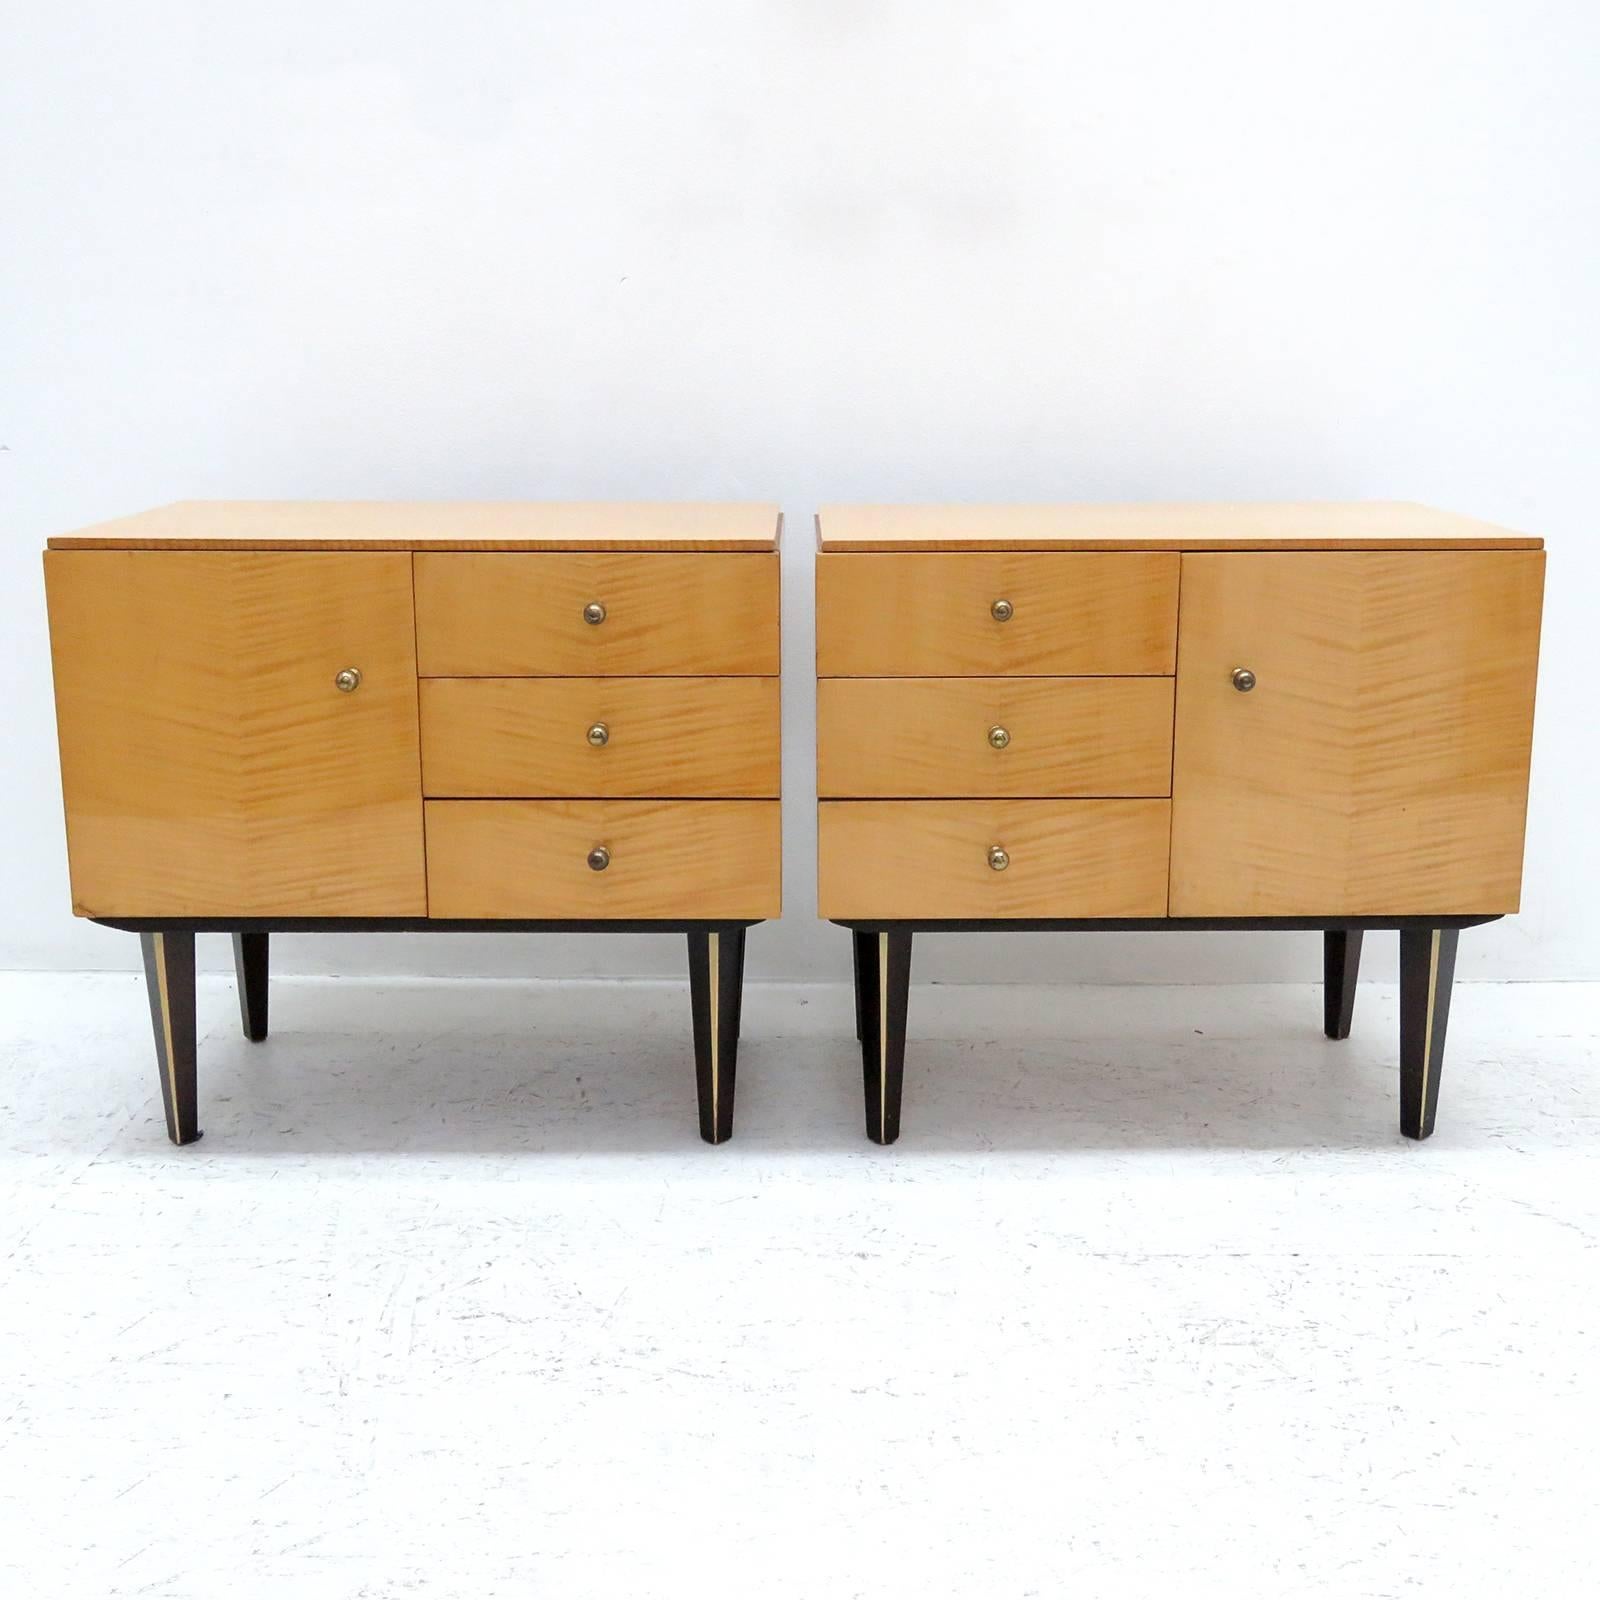 wonderful set of 1950s German birch veneer nightstands with one door and three drawers each, brass hardware, legs painted black with a decorative egg shell colored vertical strip.
 